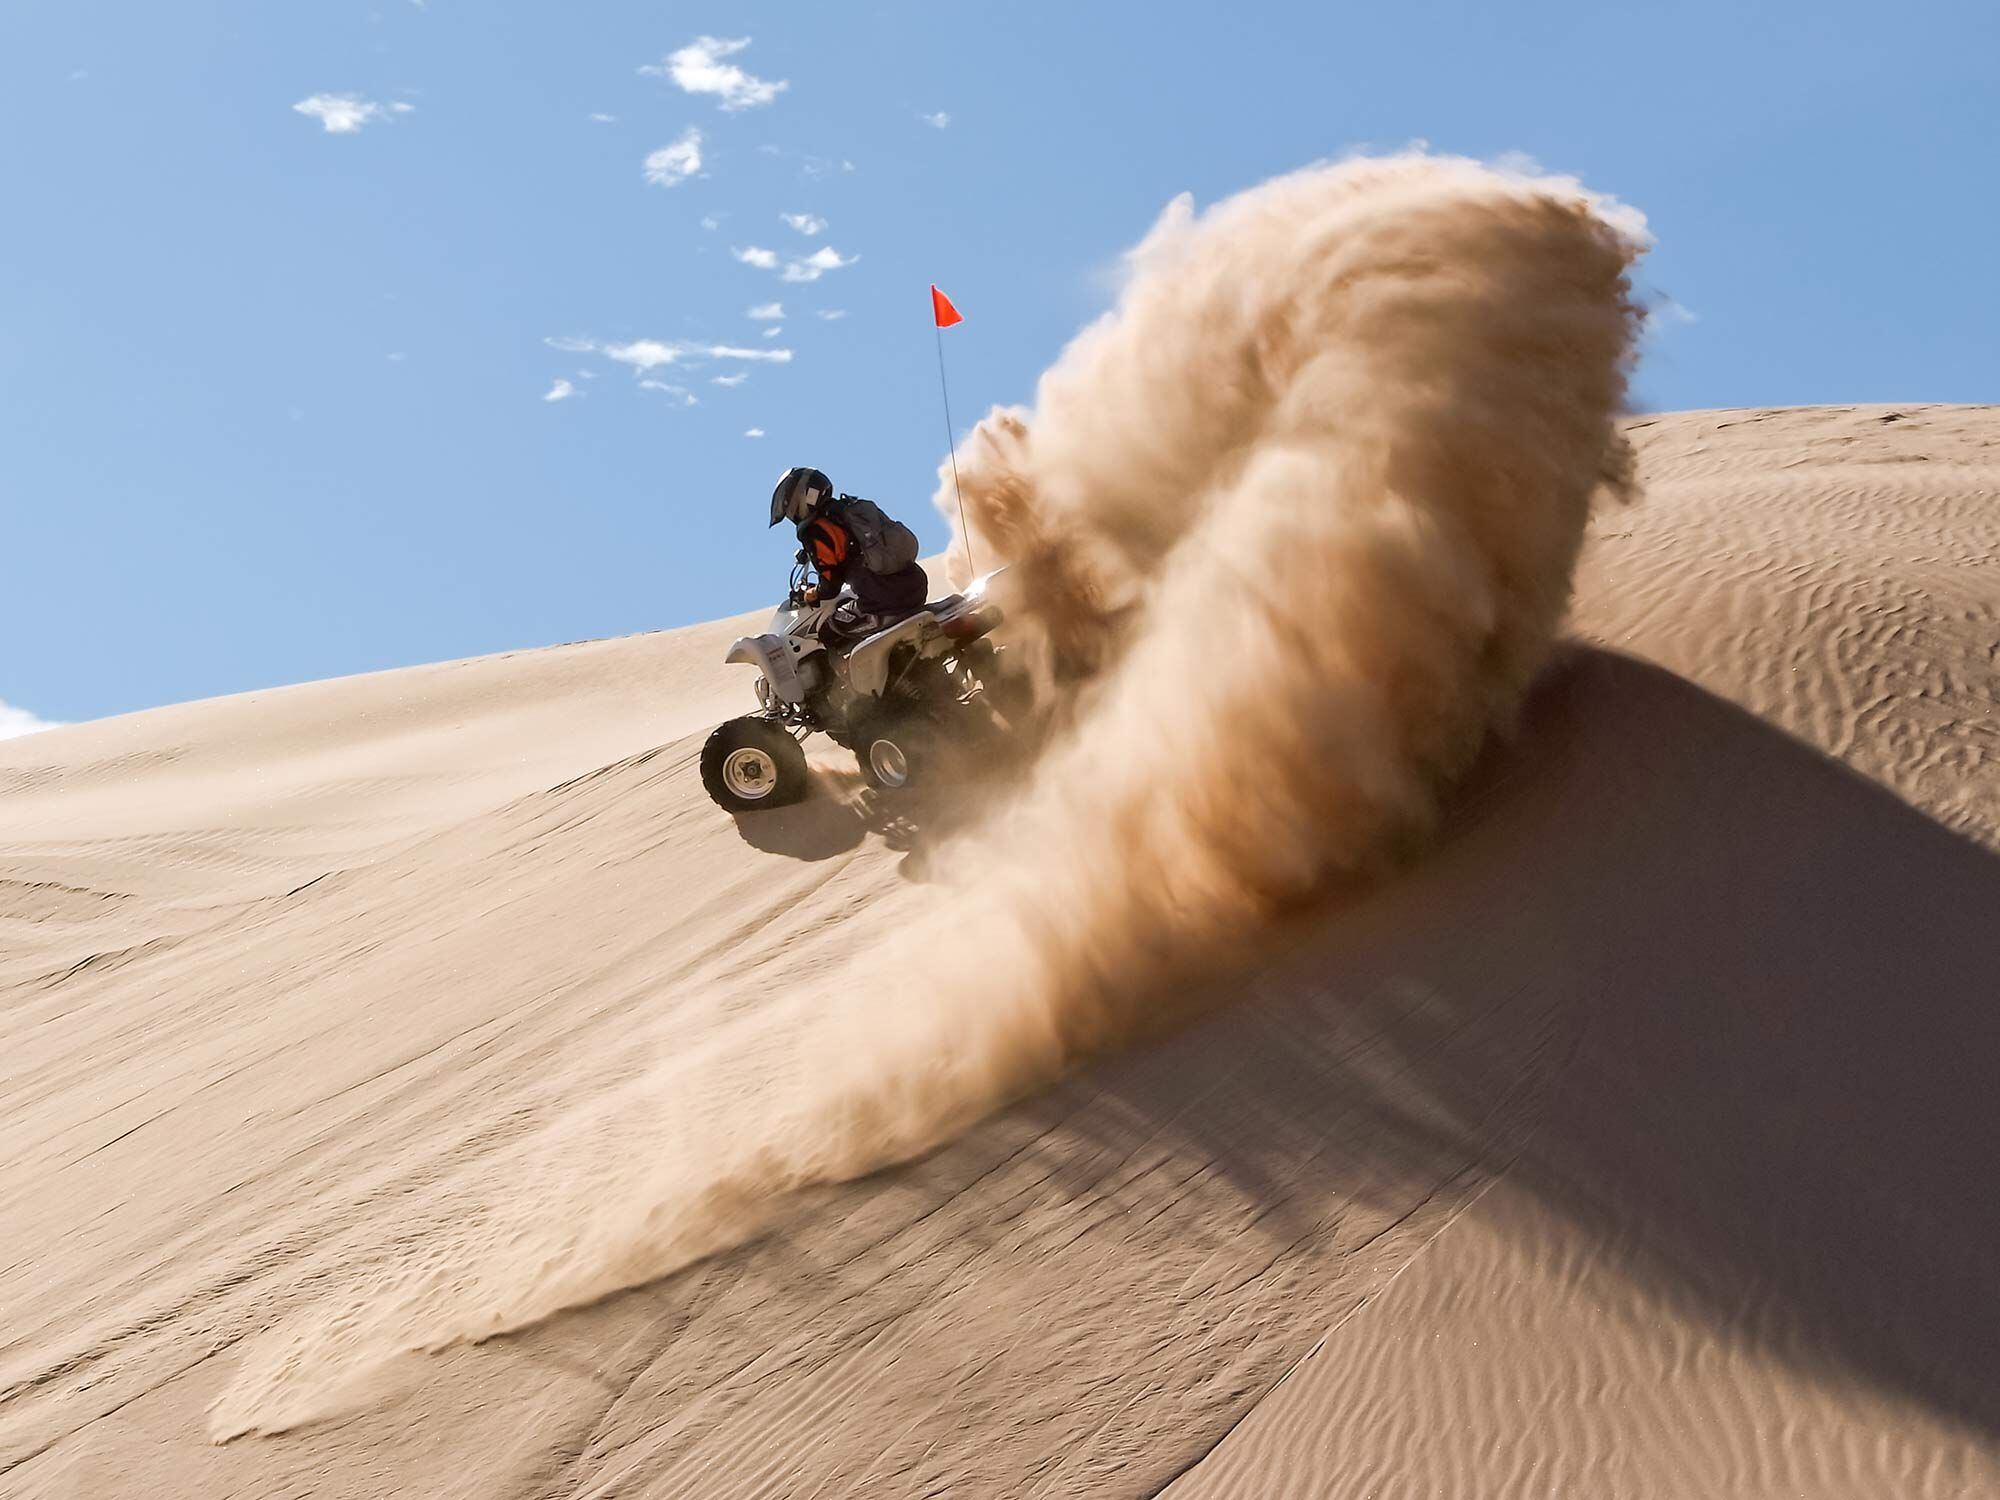 Shred some sand dunes with these great riding spots.